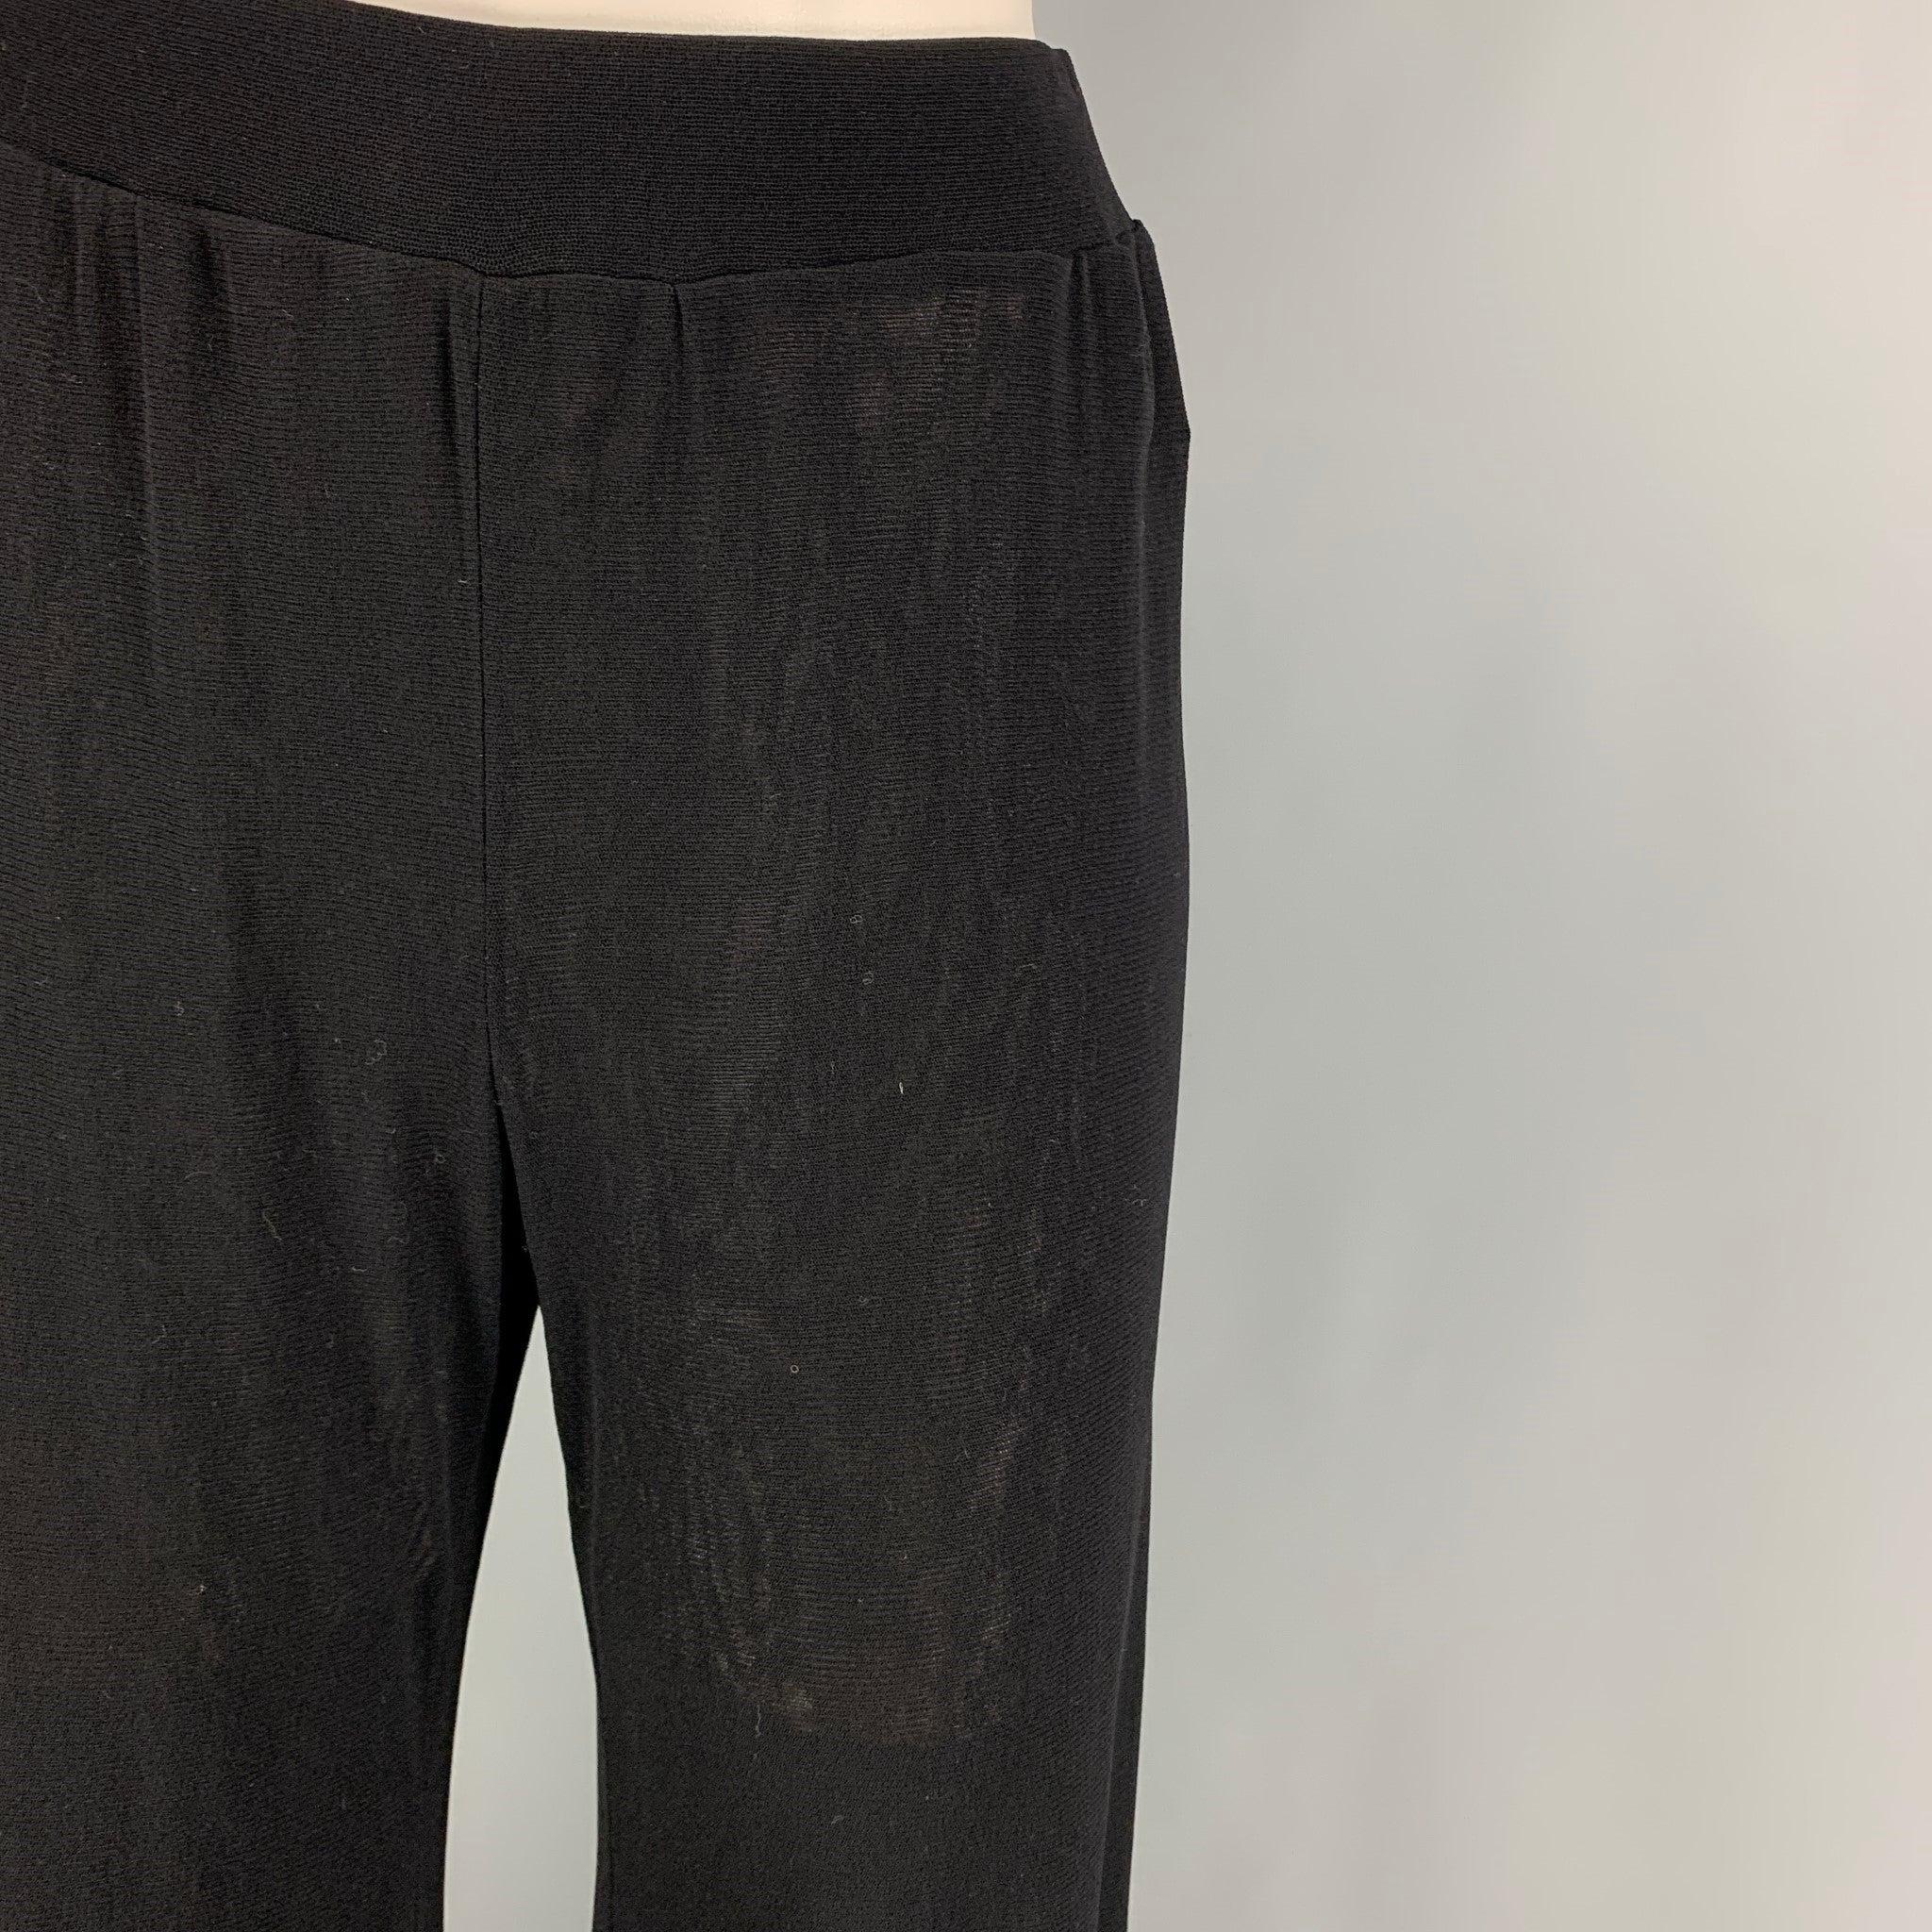 JEAN PAUL GAULTIER 'SOLEIL' pants comes in a black mesh nylon featuring a elastic waist and elastic cuffs. Made in Italy.
Very Good
Pre-Owned Condition. 

Marked:   L  

Measurements: 
  Waist: 28 inches  Rise: 12 inches  Inseam: 31 inches 
  
  
